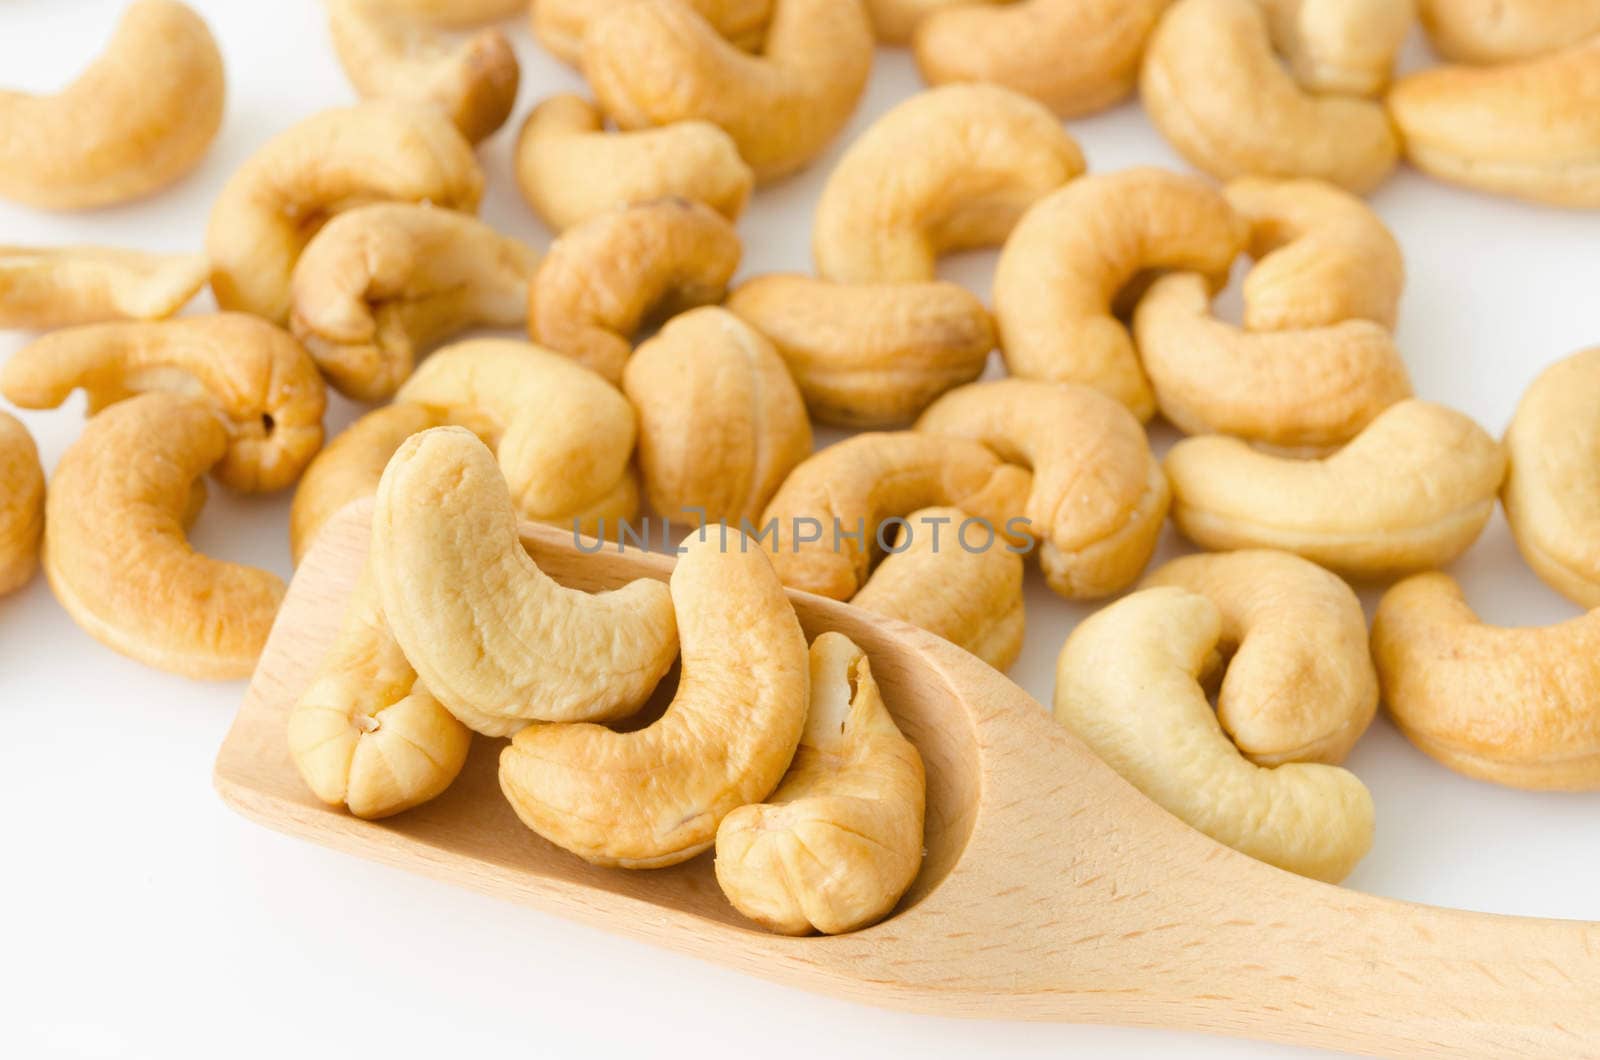 Roasted cashew nuts in wooden spoon. by Gamjai